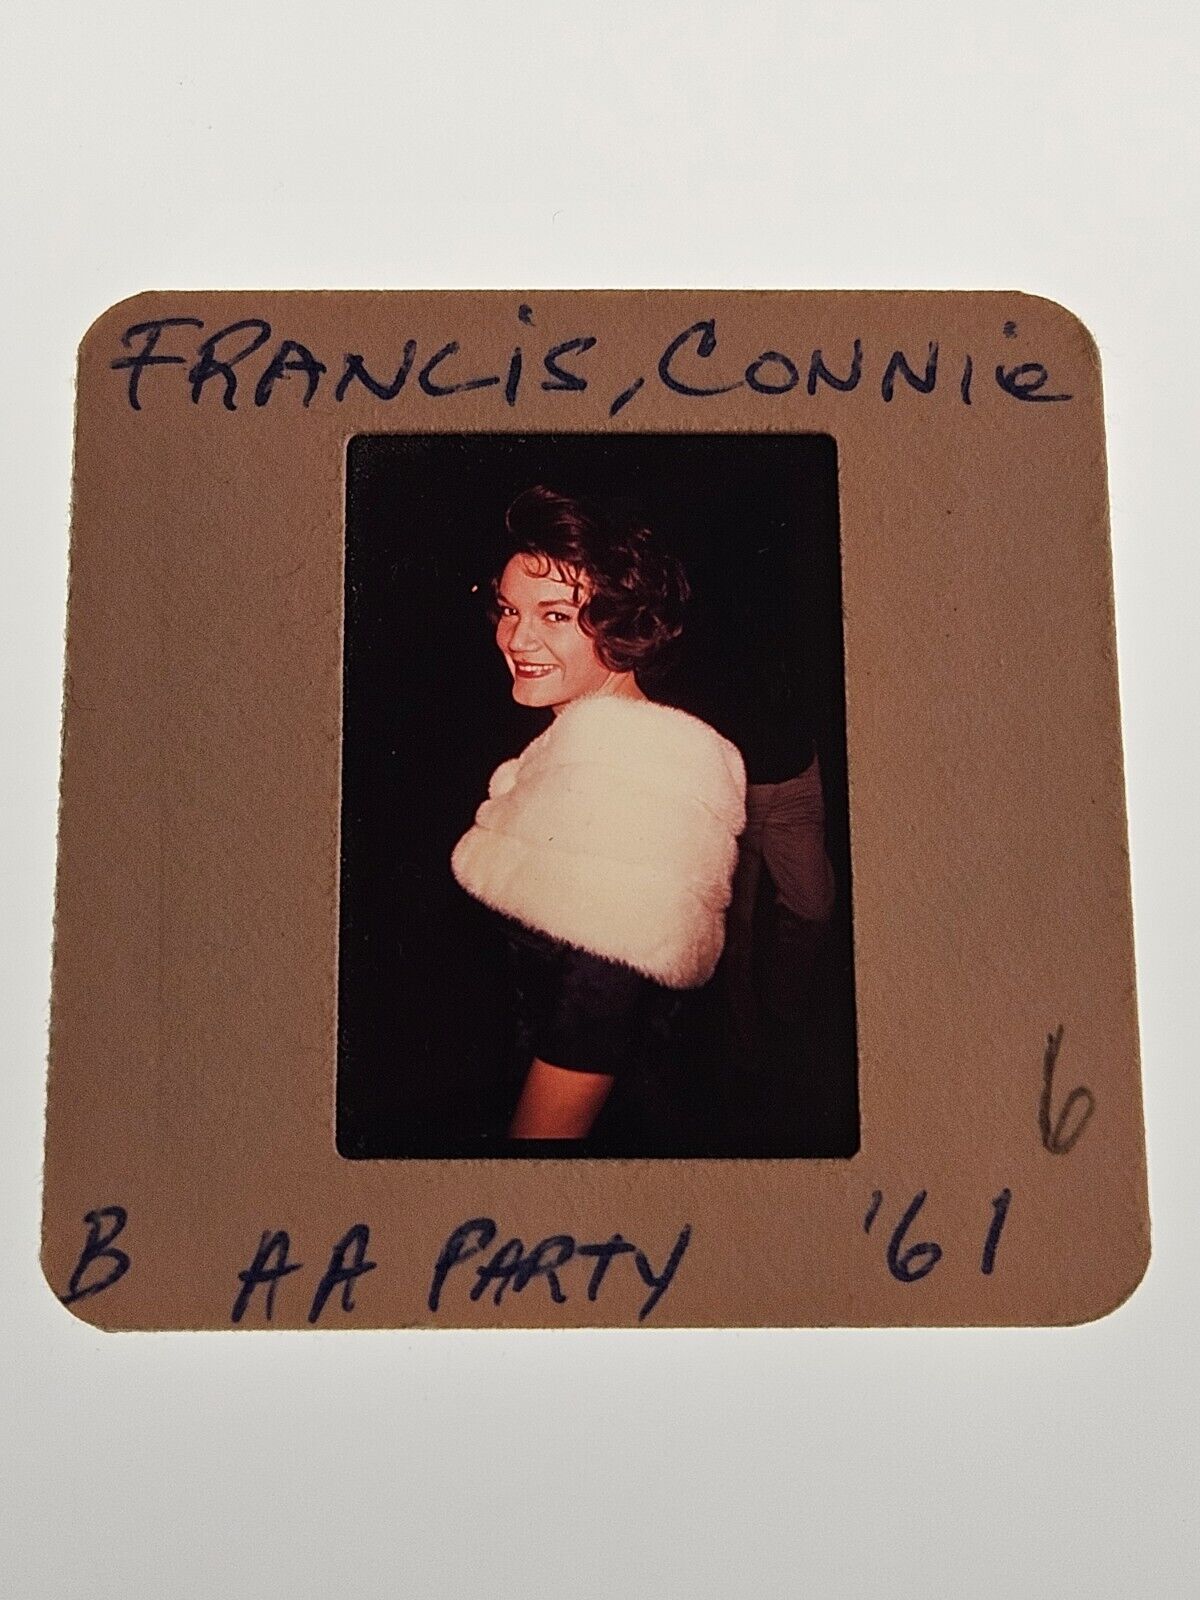 CONNIE FRANCIS SINGER/ ACTRESS  PHOTO 35MM FILM SLIDE